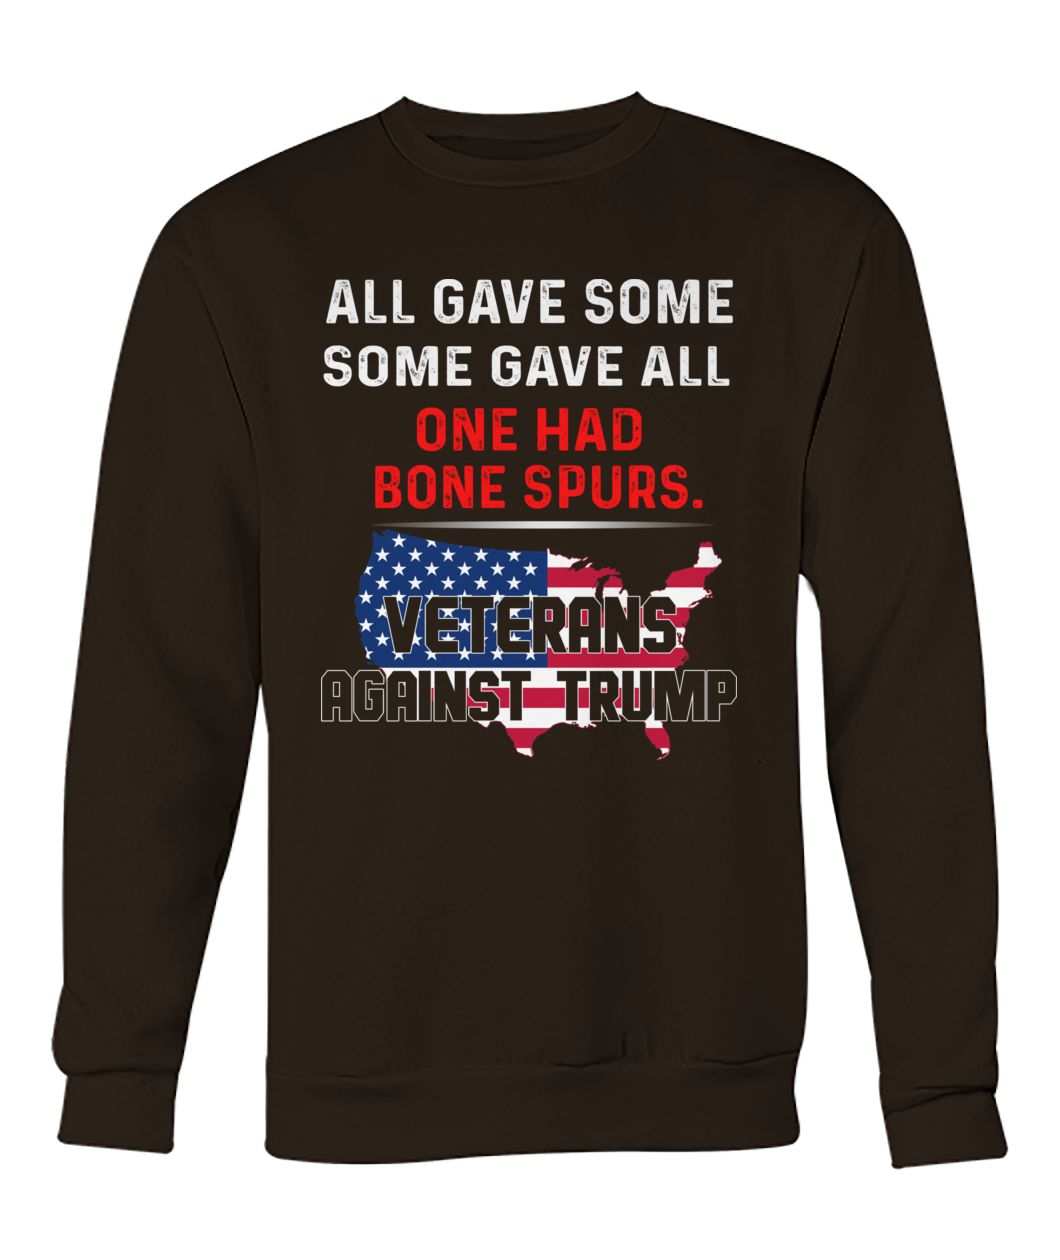 All gave some gave all one had bone spurs veterans against trump crew neck sweatshirt